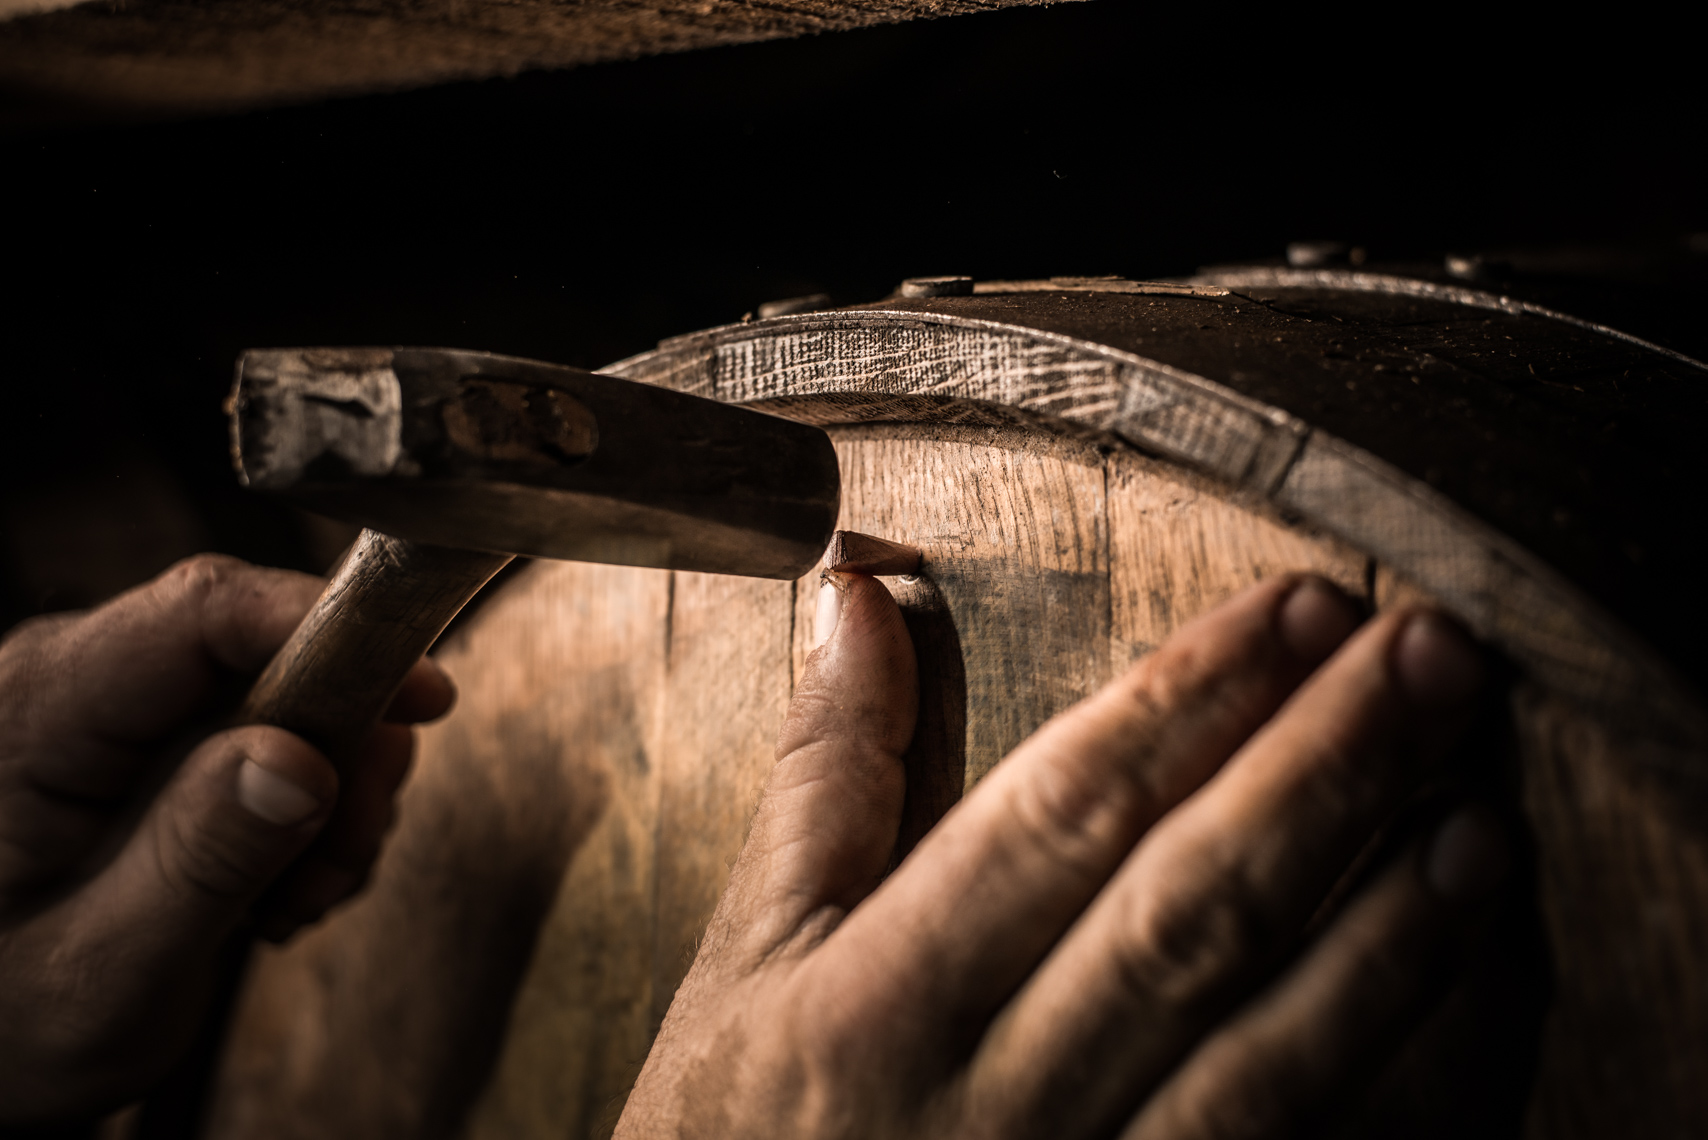 Gritty male hands repair a barrel leak in a warehouse at George Dickel Distillery - Tennessee Whiskey, Reportage, Travel, Narrative, Kentucky, Southern, lifestyle, real life, real people, at work, working, stock photography, reportage, Kristina Krug Photographer, Southeast, Chicago, barrels, bourbon, whisky, photojournalist, photojournalism, Travel Photographer, beverage, industrial, industry, agriculture, liquor, lifestyle, beverage photographer, whisky advocate, beer, southern life, whisky, mash, corn, grains, charcoal, filtration, wood, liquor, storyteller, Cascade Springs, Tullahoma, hands, dirt, working, wood, man, strength, dark, rick house, barrel, barrel house, moody, grit, motion, movement, action, hands, dirt